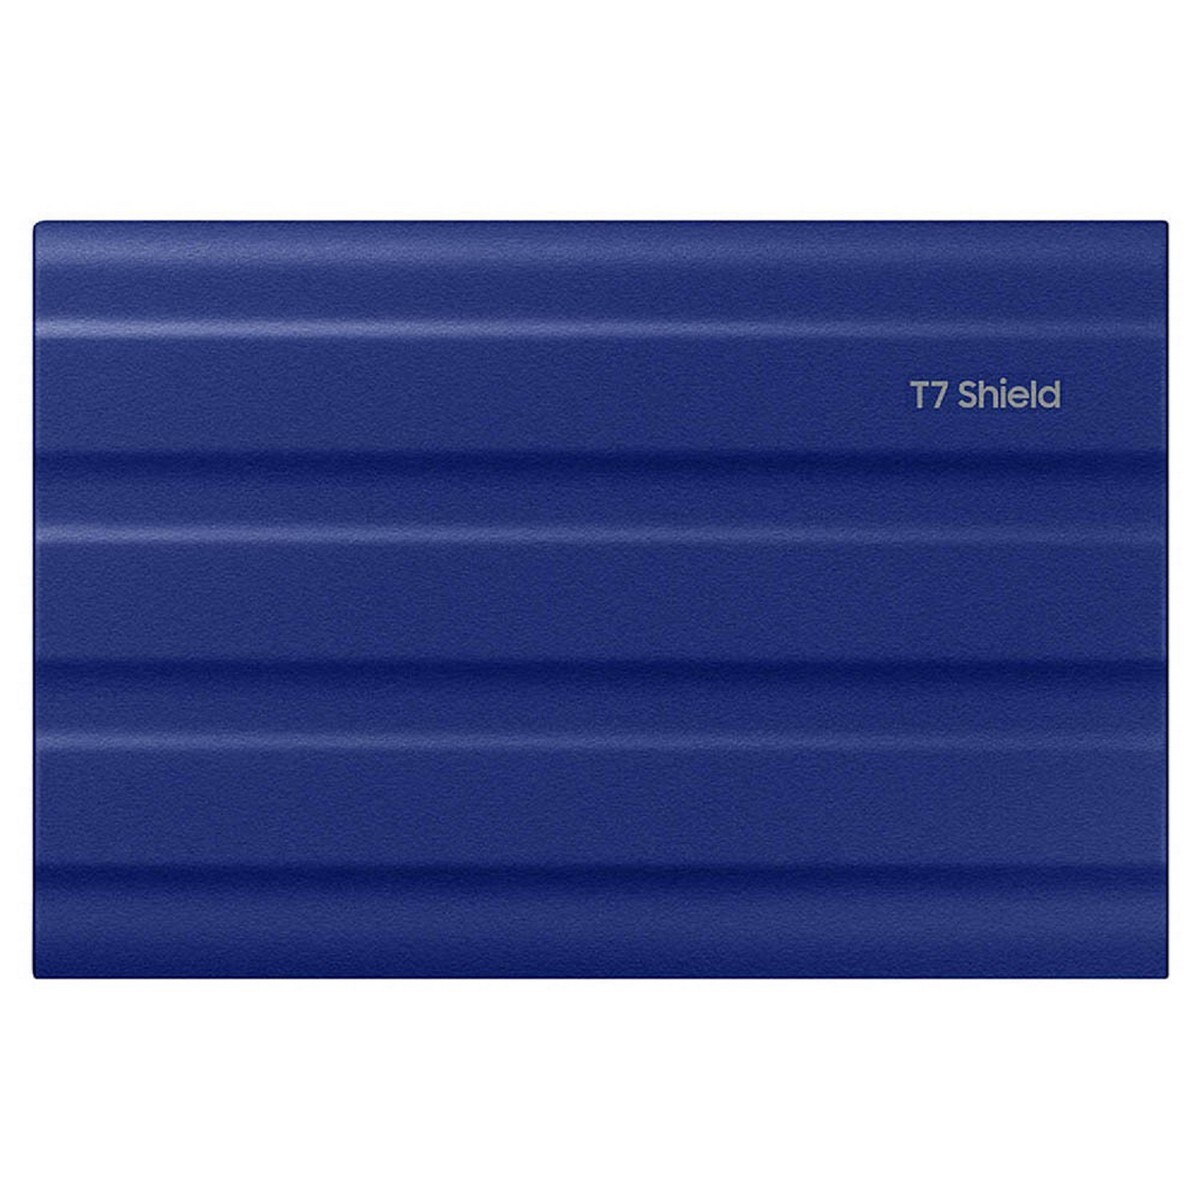 Samsung 1 TB T7 Shield Portable Solid State Drive Blue